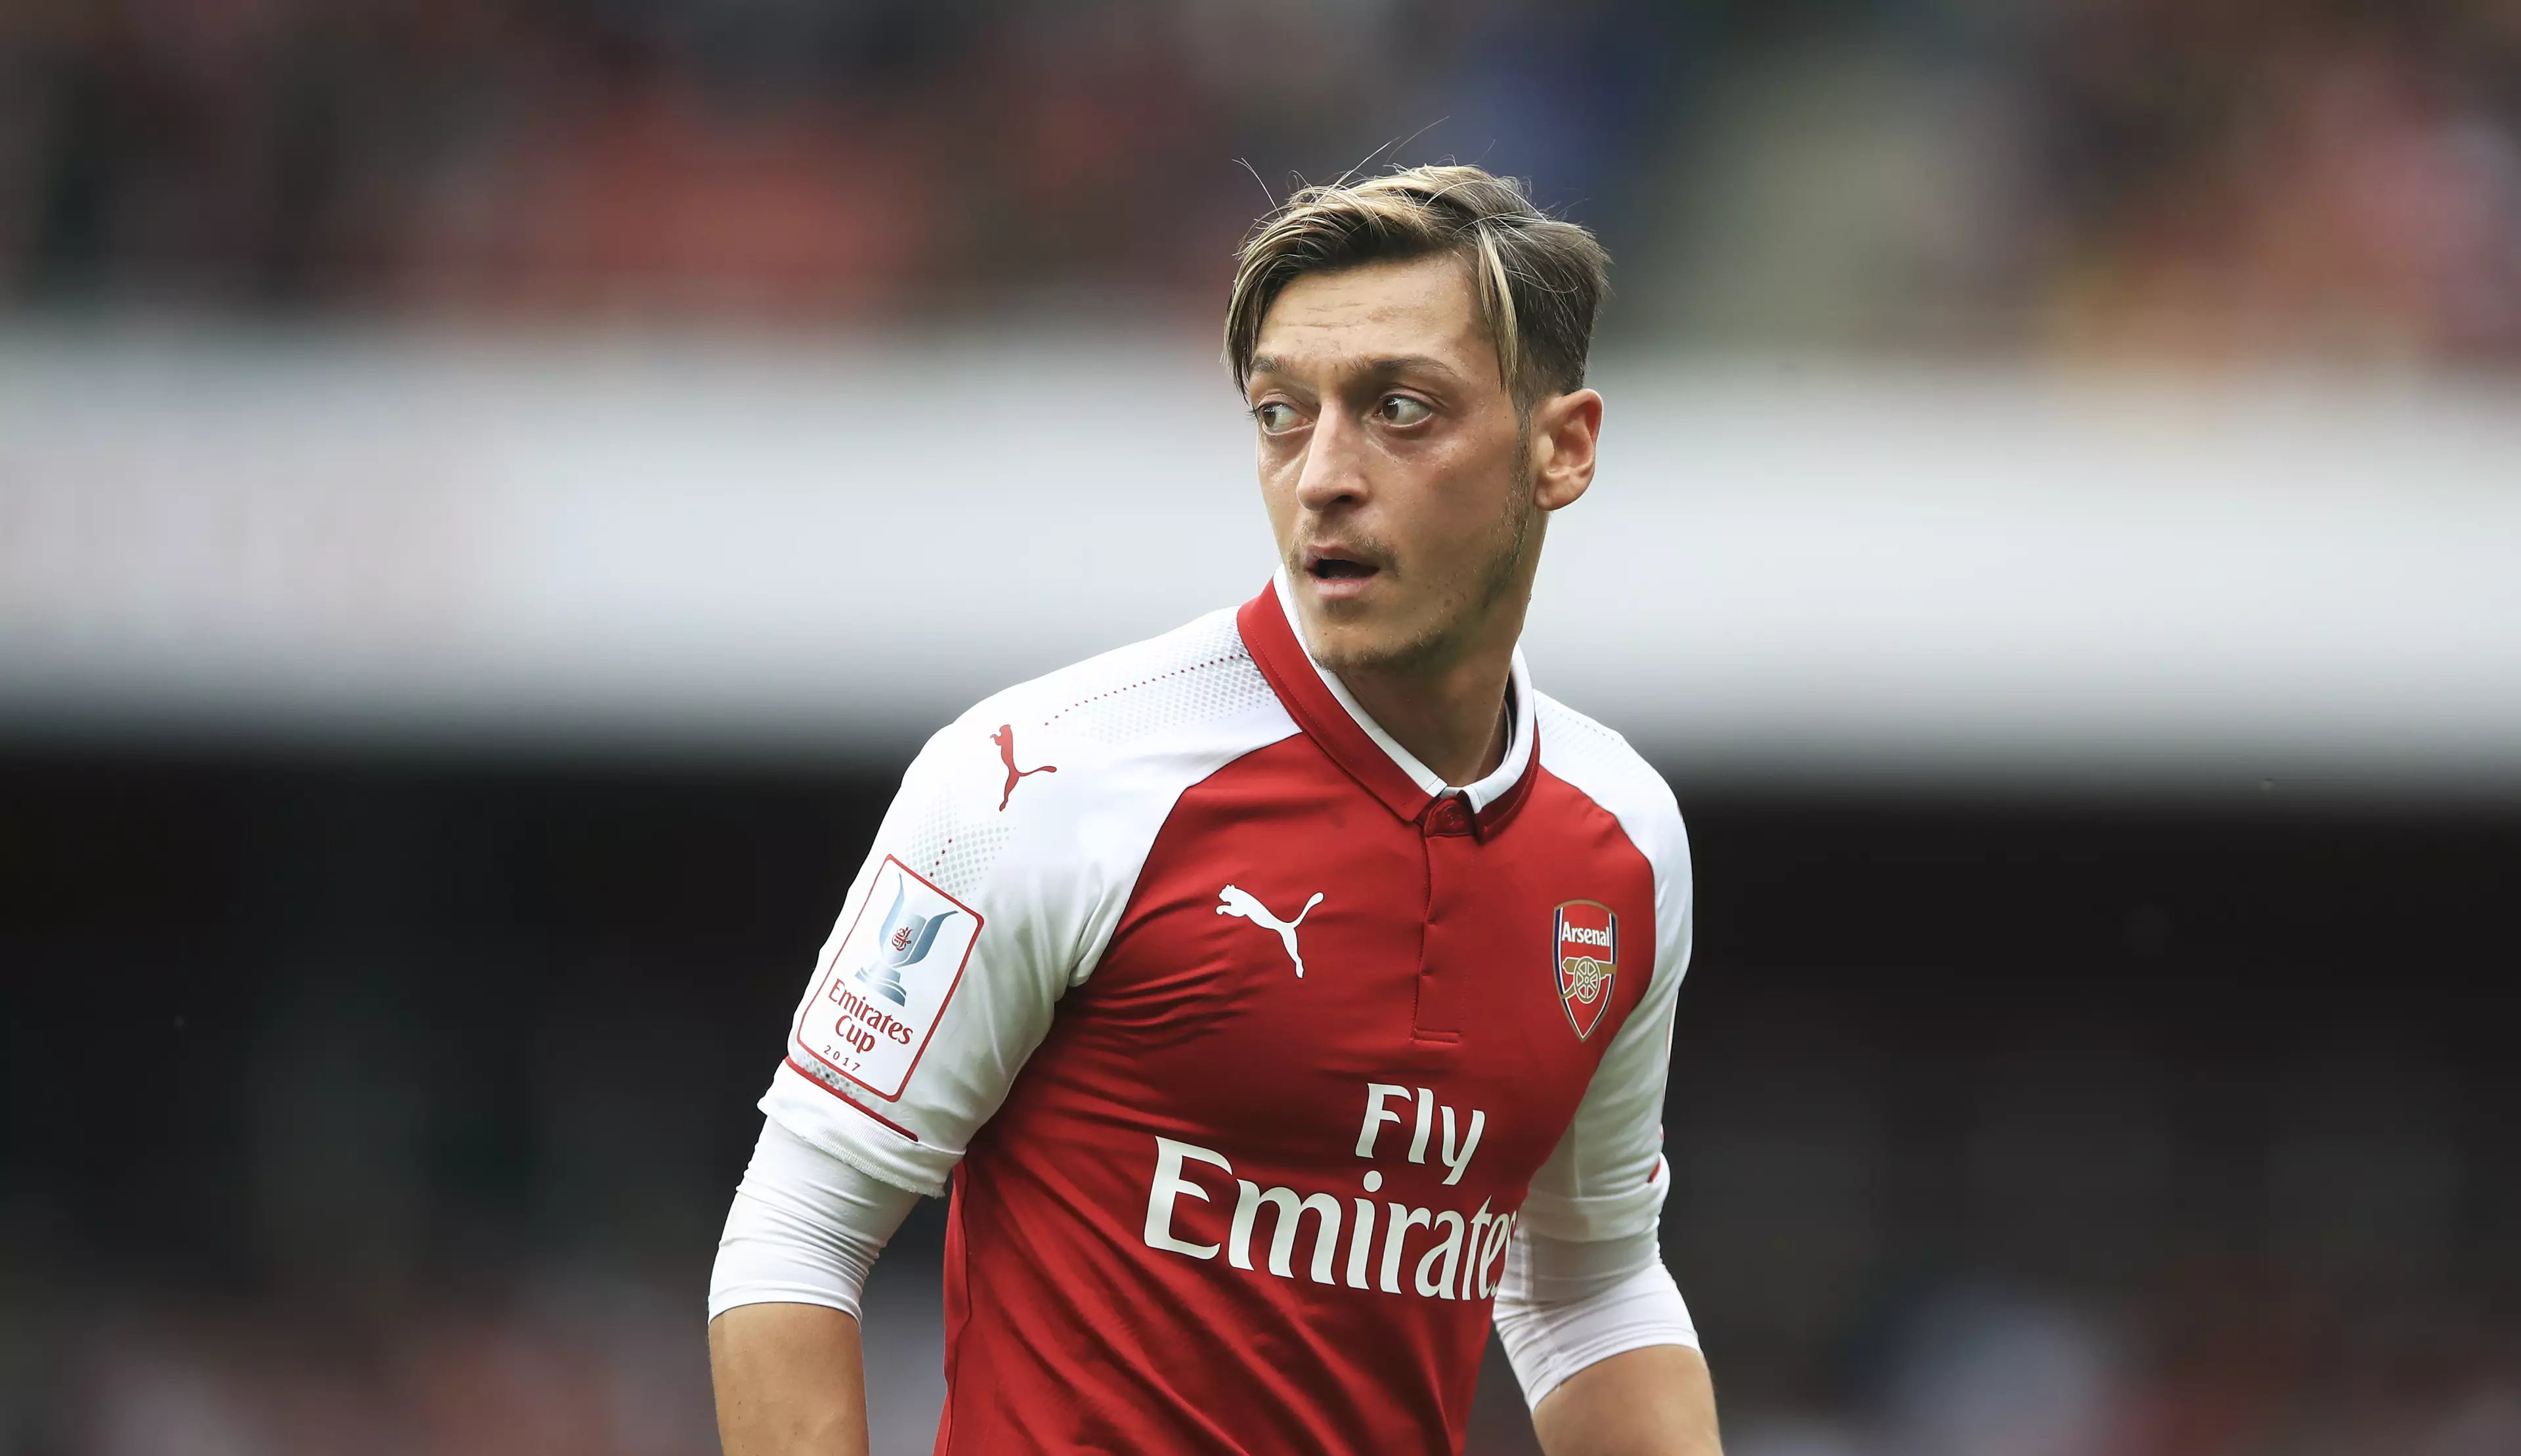 Ozil's £350k-a-week contract isn't helping Arsenal. Image: PA Images